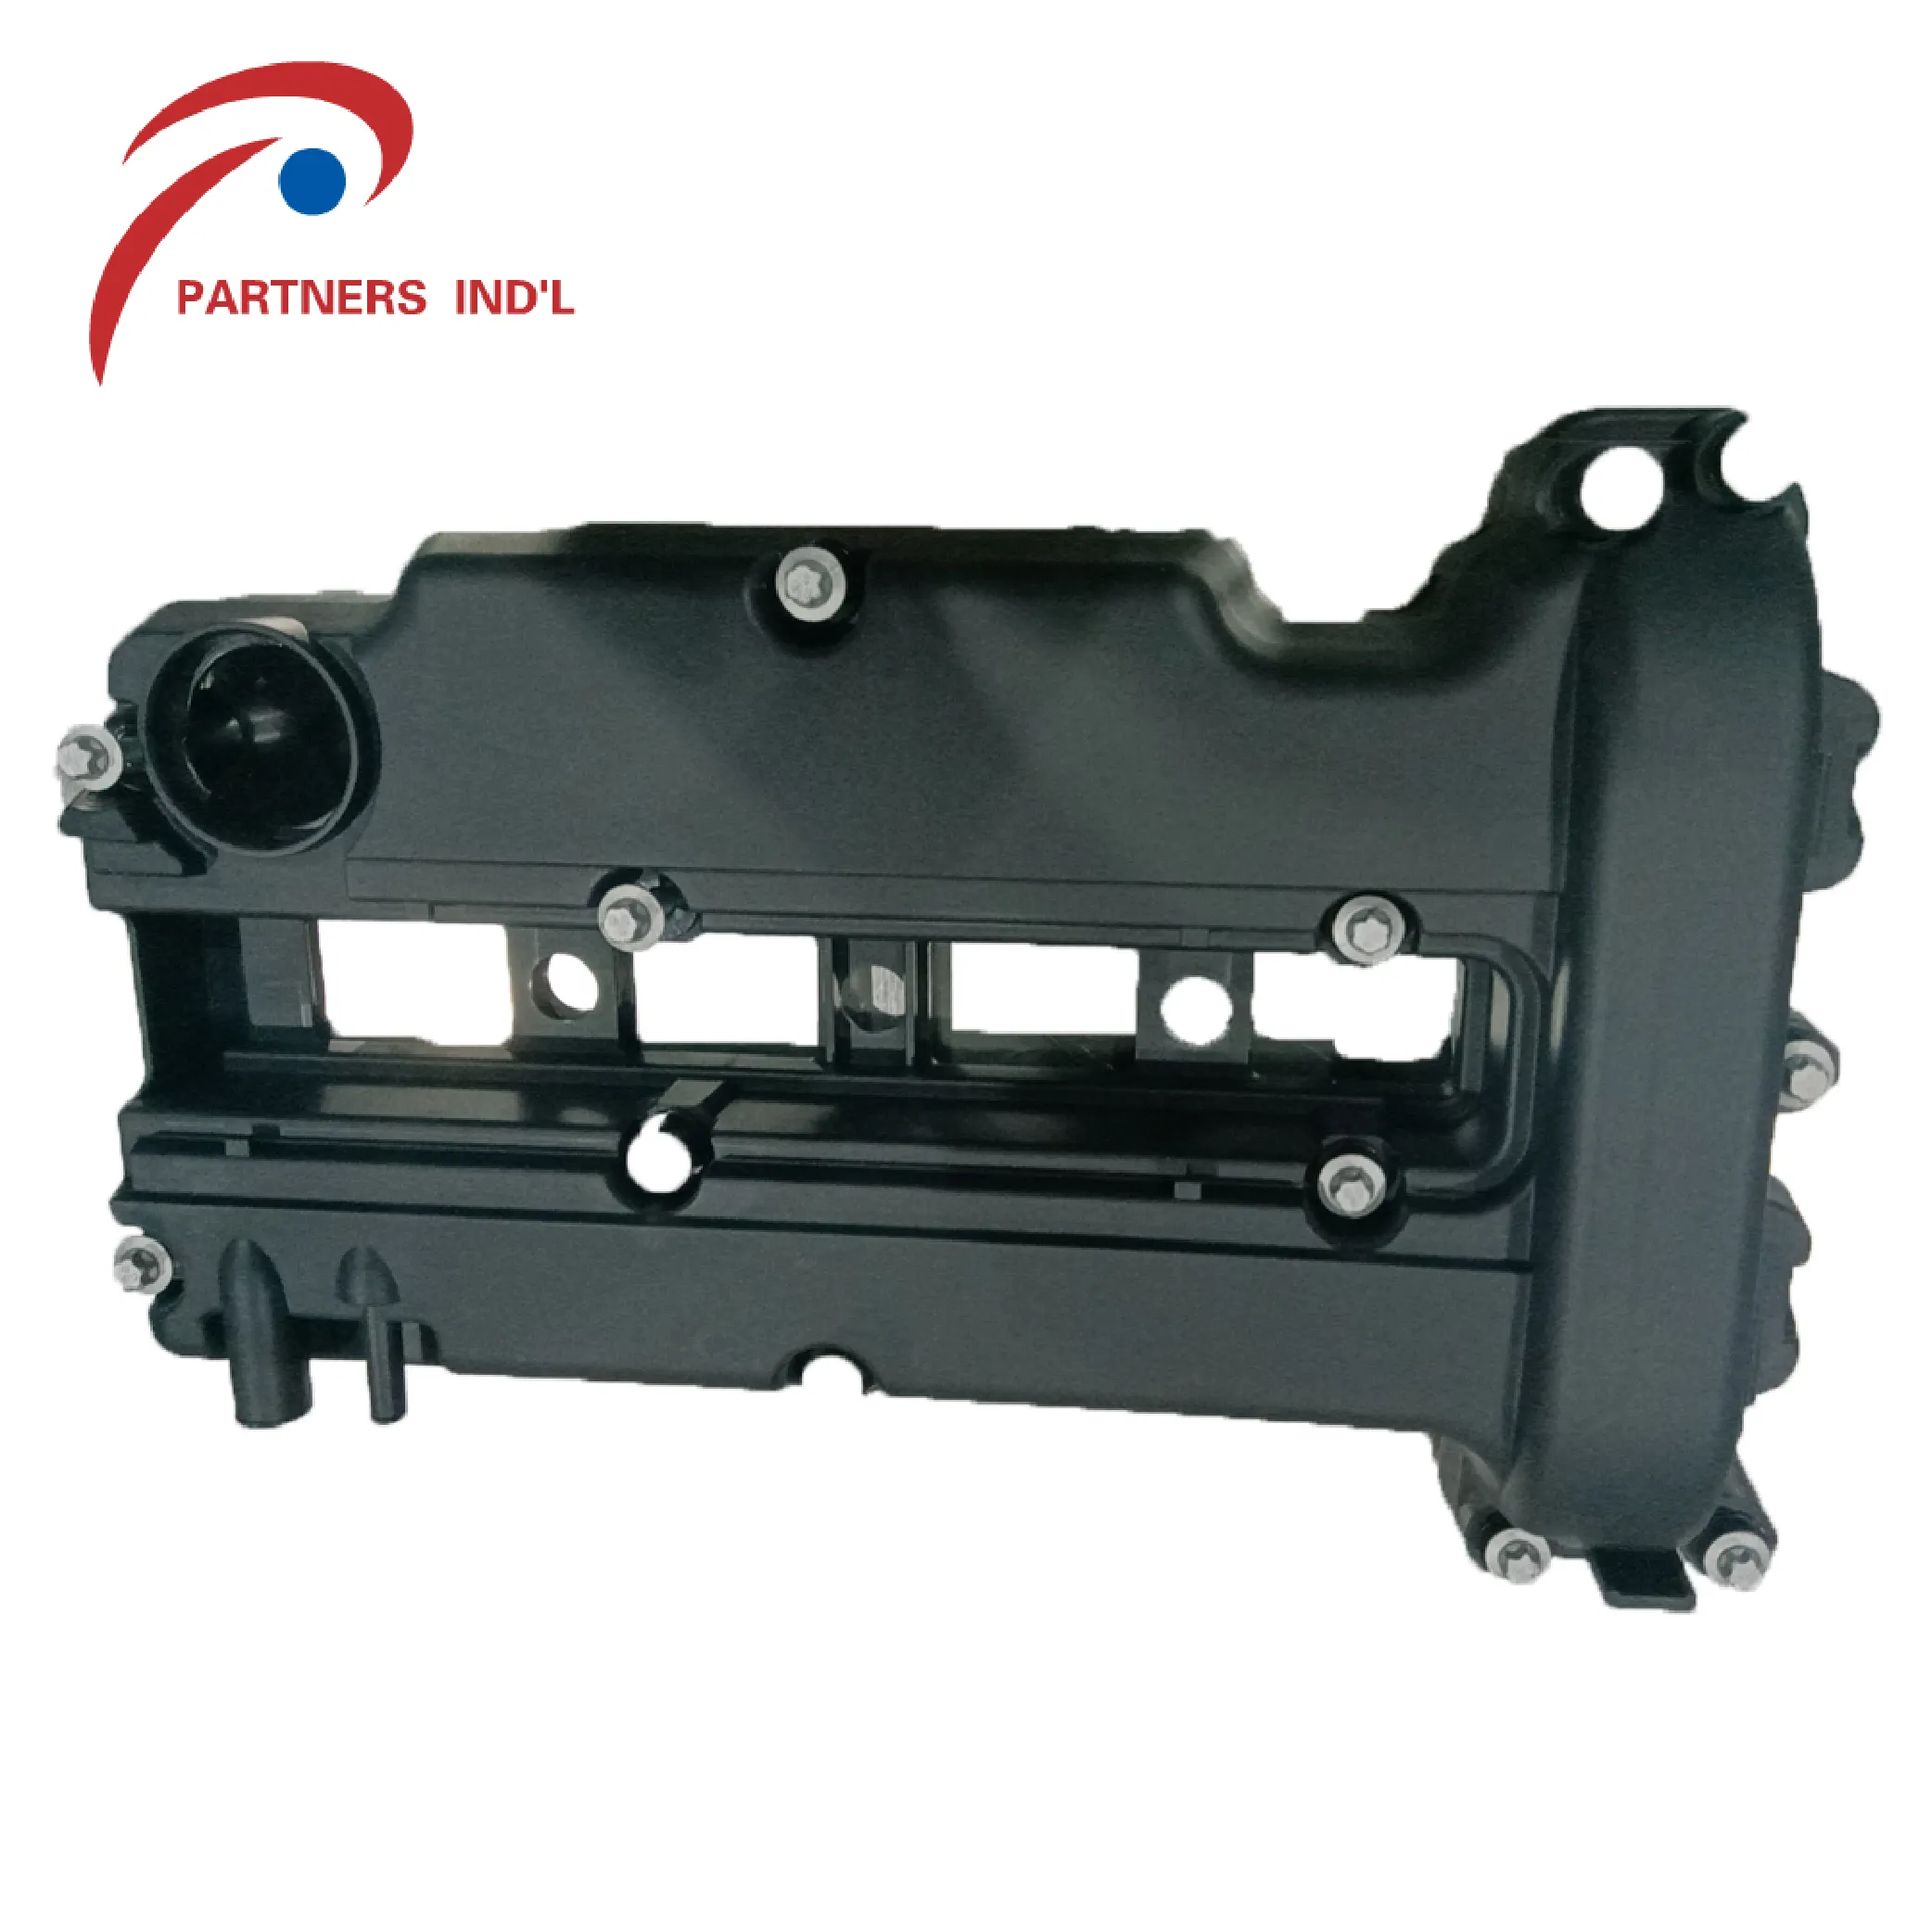 ZPARTNERS Engine Valve Cover with Seal Applicable for Vauxhall CORSA D 2007 55351461 WNSP2201532